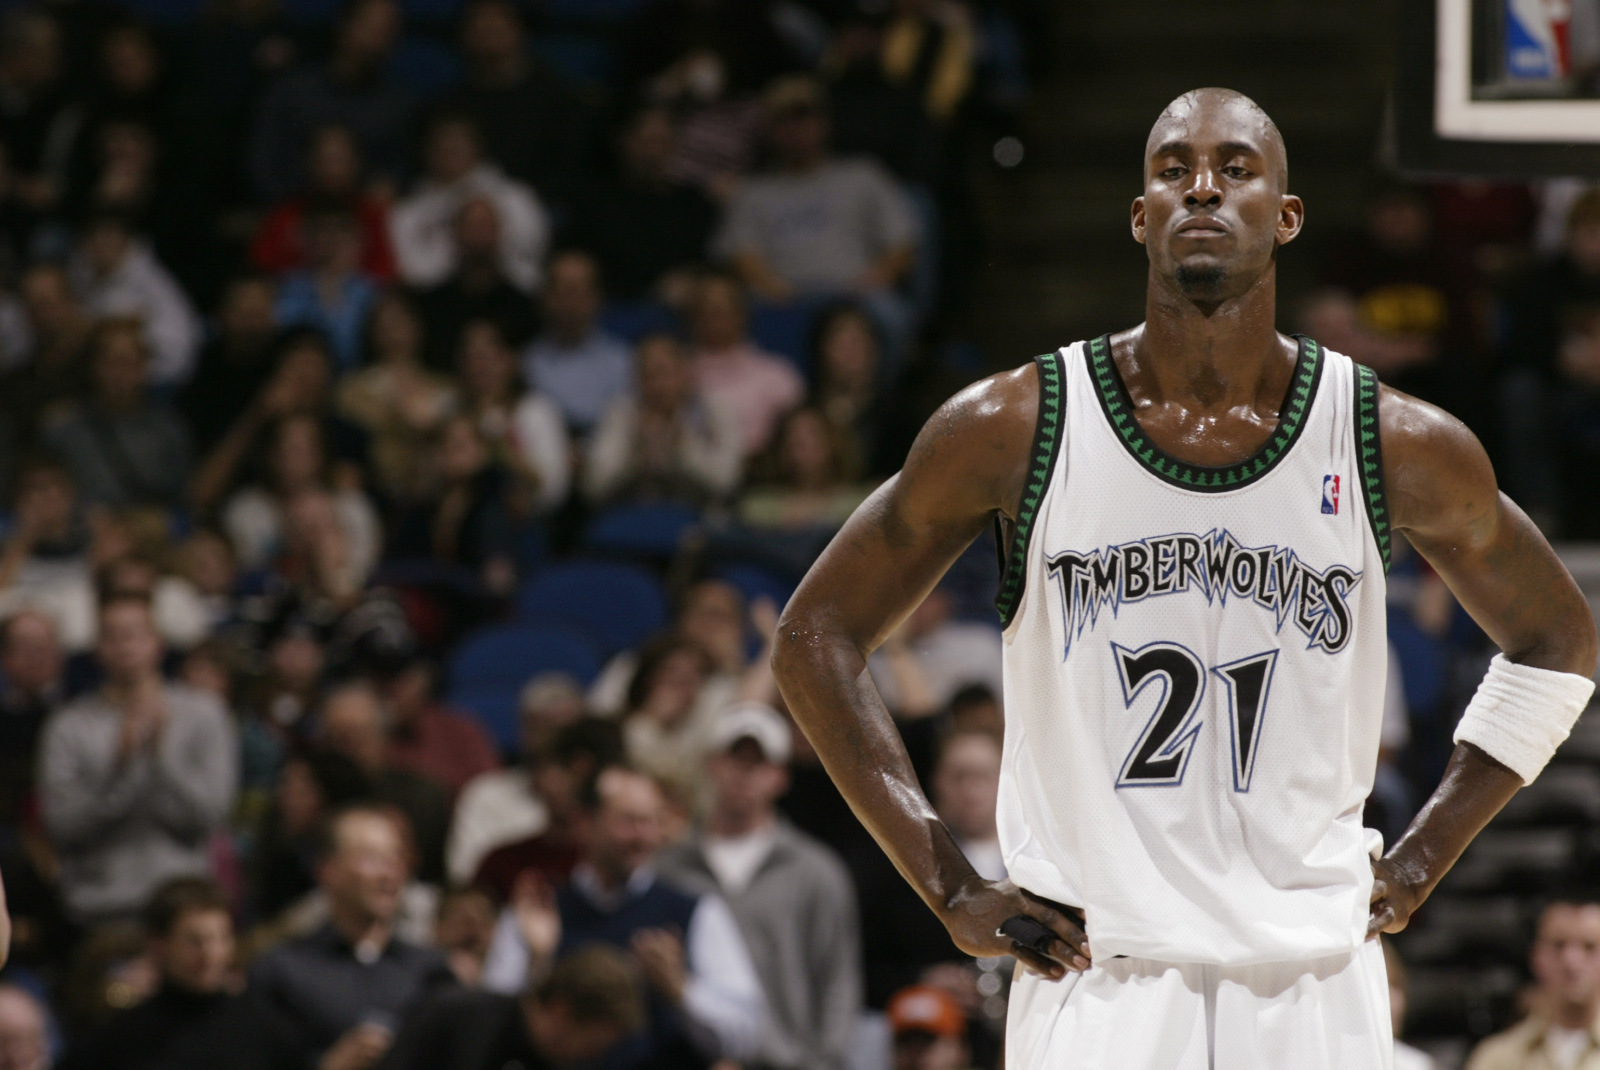 I'm not entertaining it” — Kevin Garnett on having his No. 21 jersey retired  by the Timberwolves - Basketball Network - Your daily dose of basketball